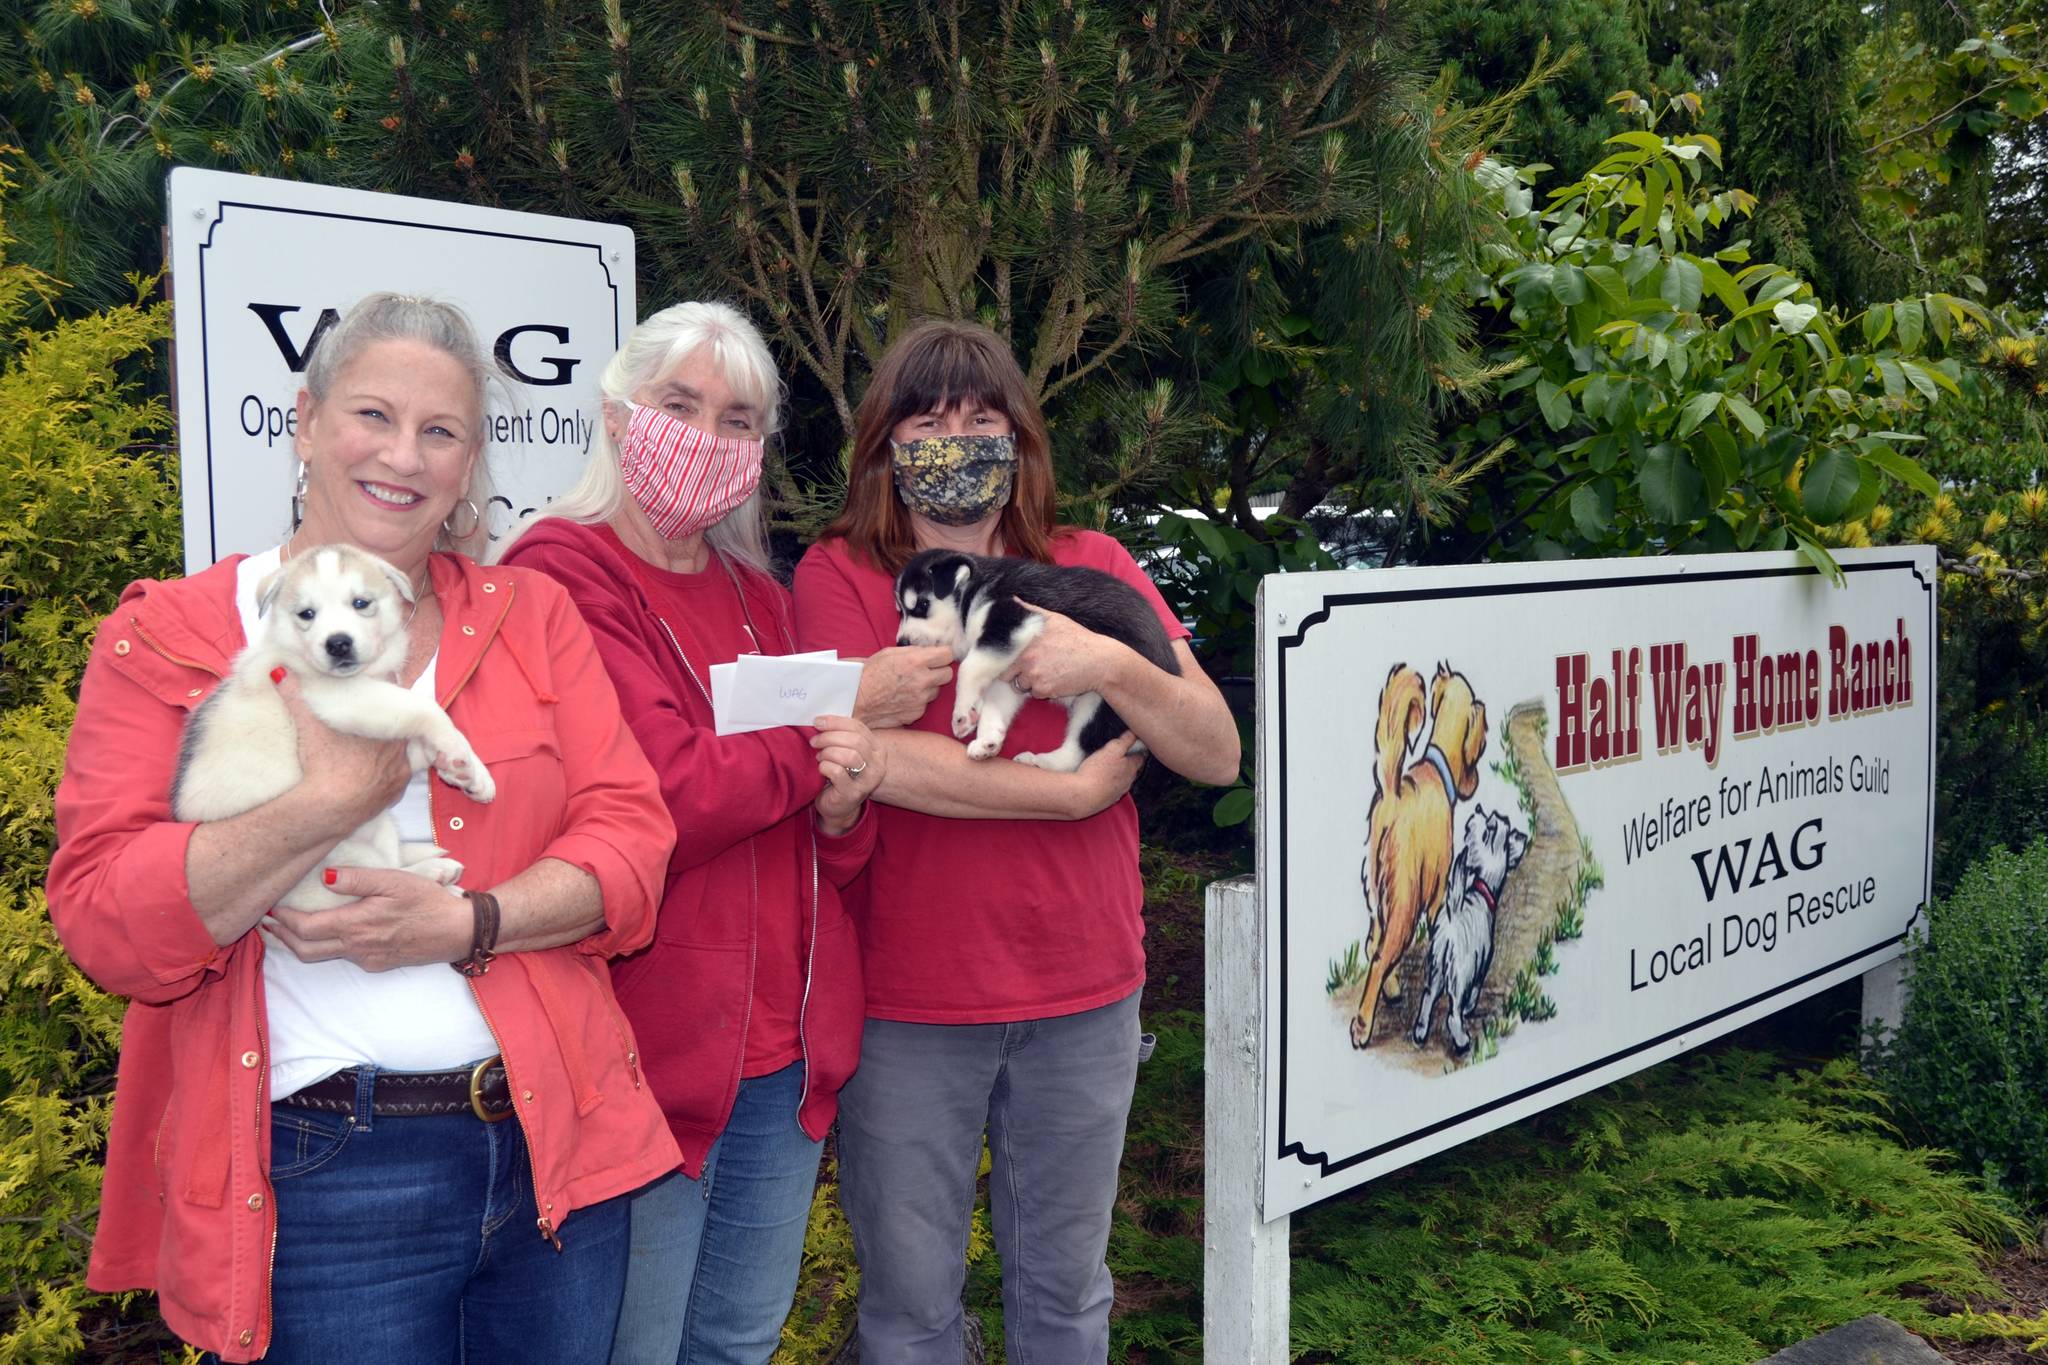 Real estate broker Karen Willcutt with Town & Country, on left, holds Zeke, a husky puppy, as she donates $1,000 from recent home sales to the Welfare for Animals Guild president Barbara Brabant and ranch manager Mel Marshall, holding Zuri the husky puppy. Sequim Gazette photo by Matthew Nash